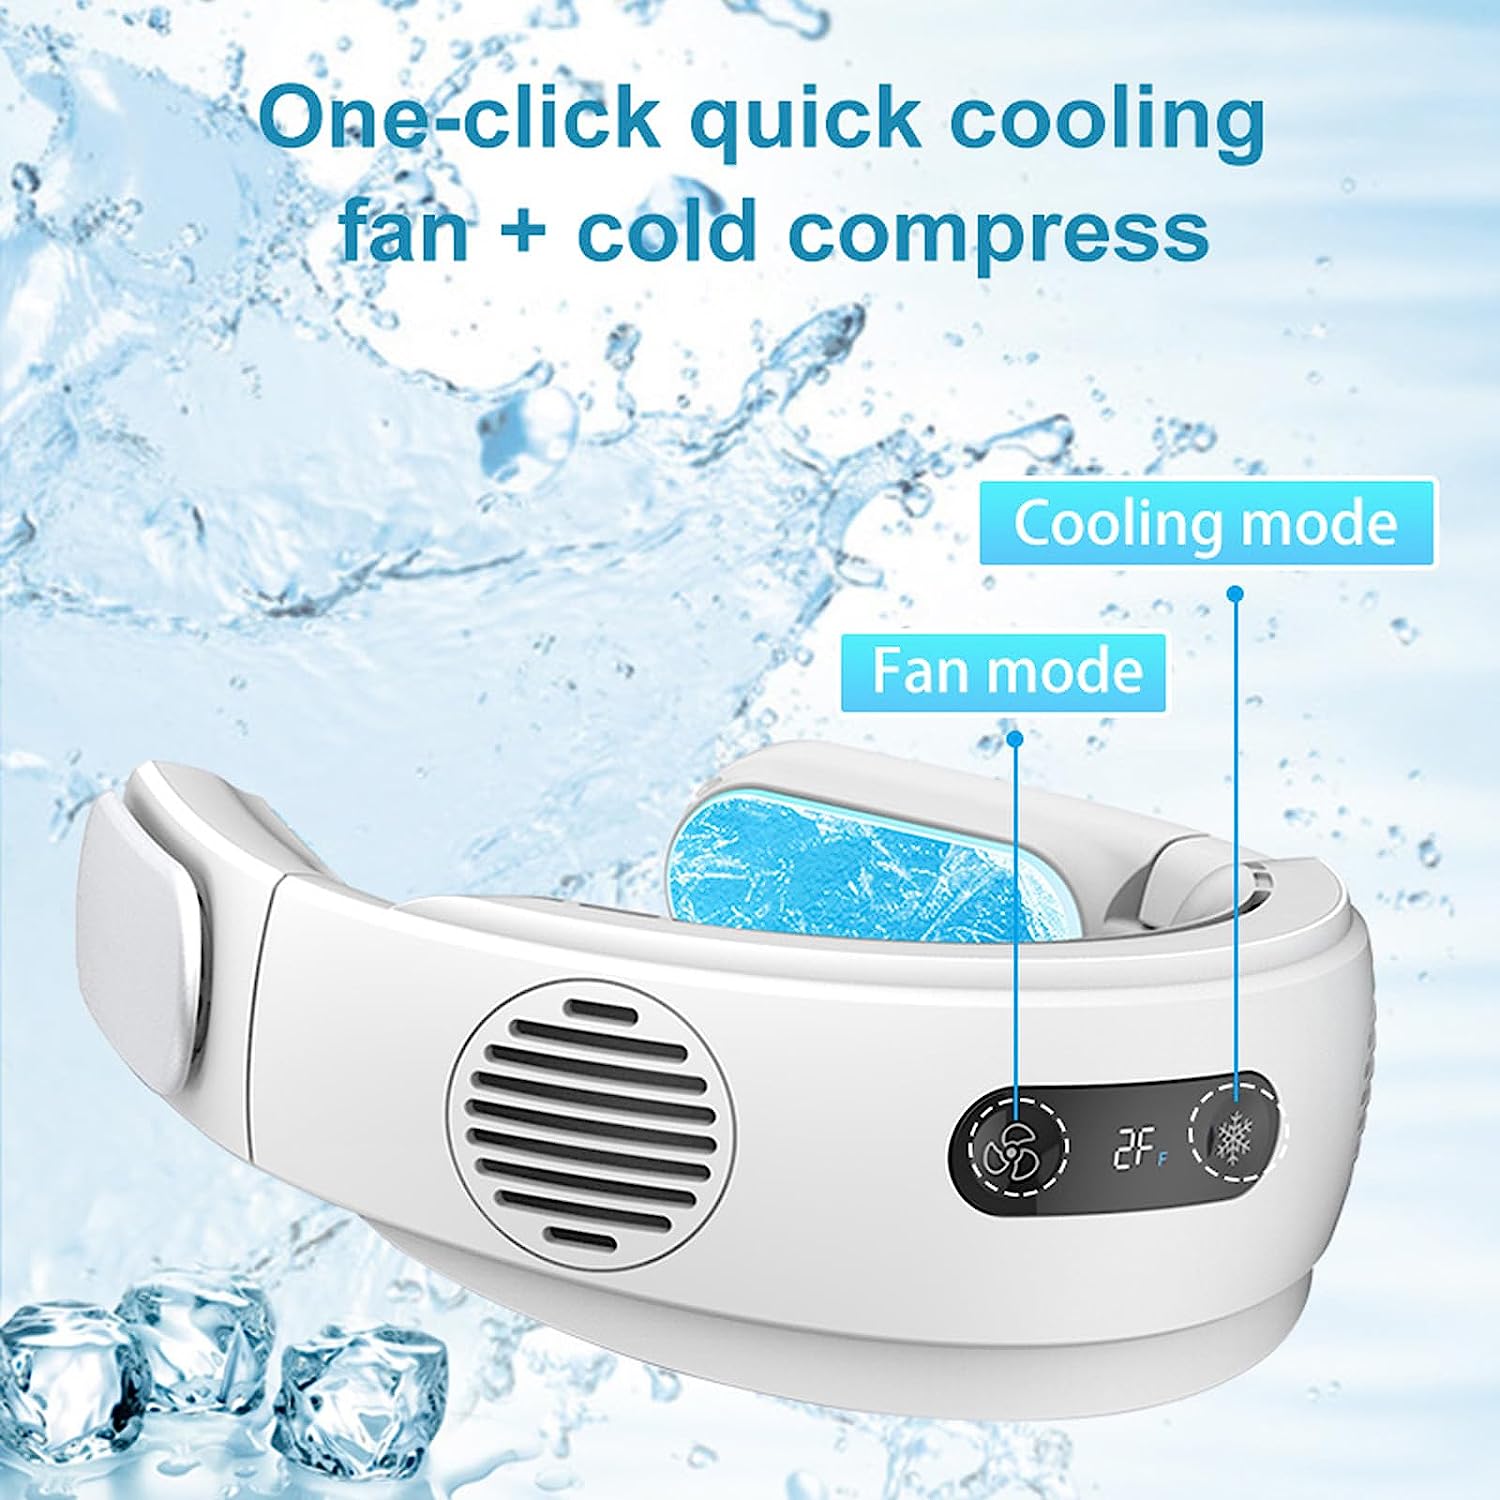 Cool Summer Portable Air Conditioning Senai Neck Fan, Neck Air Conditioning, Cooling Personal Fan, Cold Use/Foldable 5000mAh Battery-Powered, USB Fast Charging Wearable Fan, 3-Speed Adjustment Function